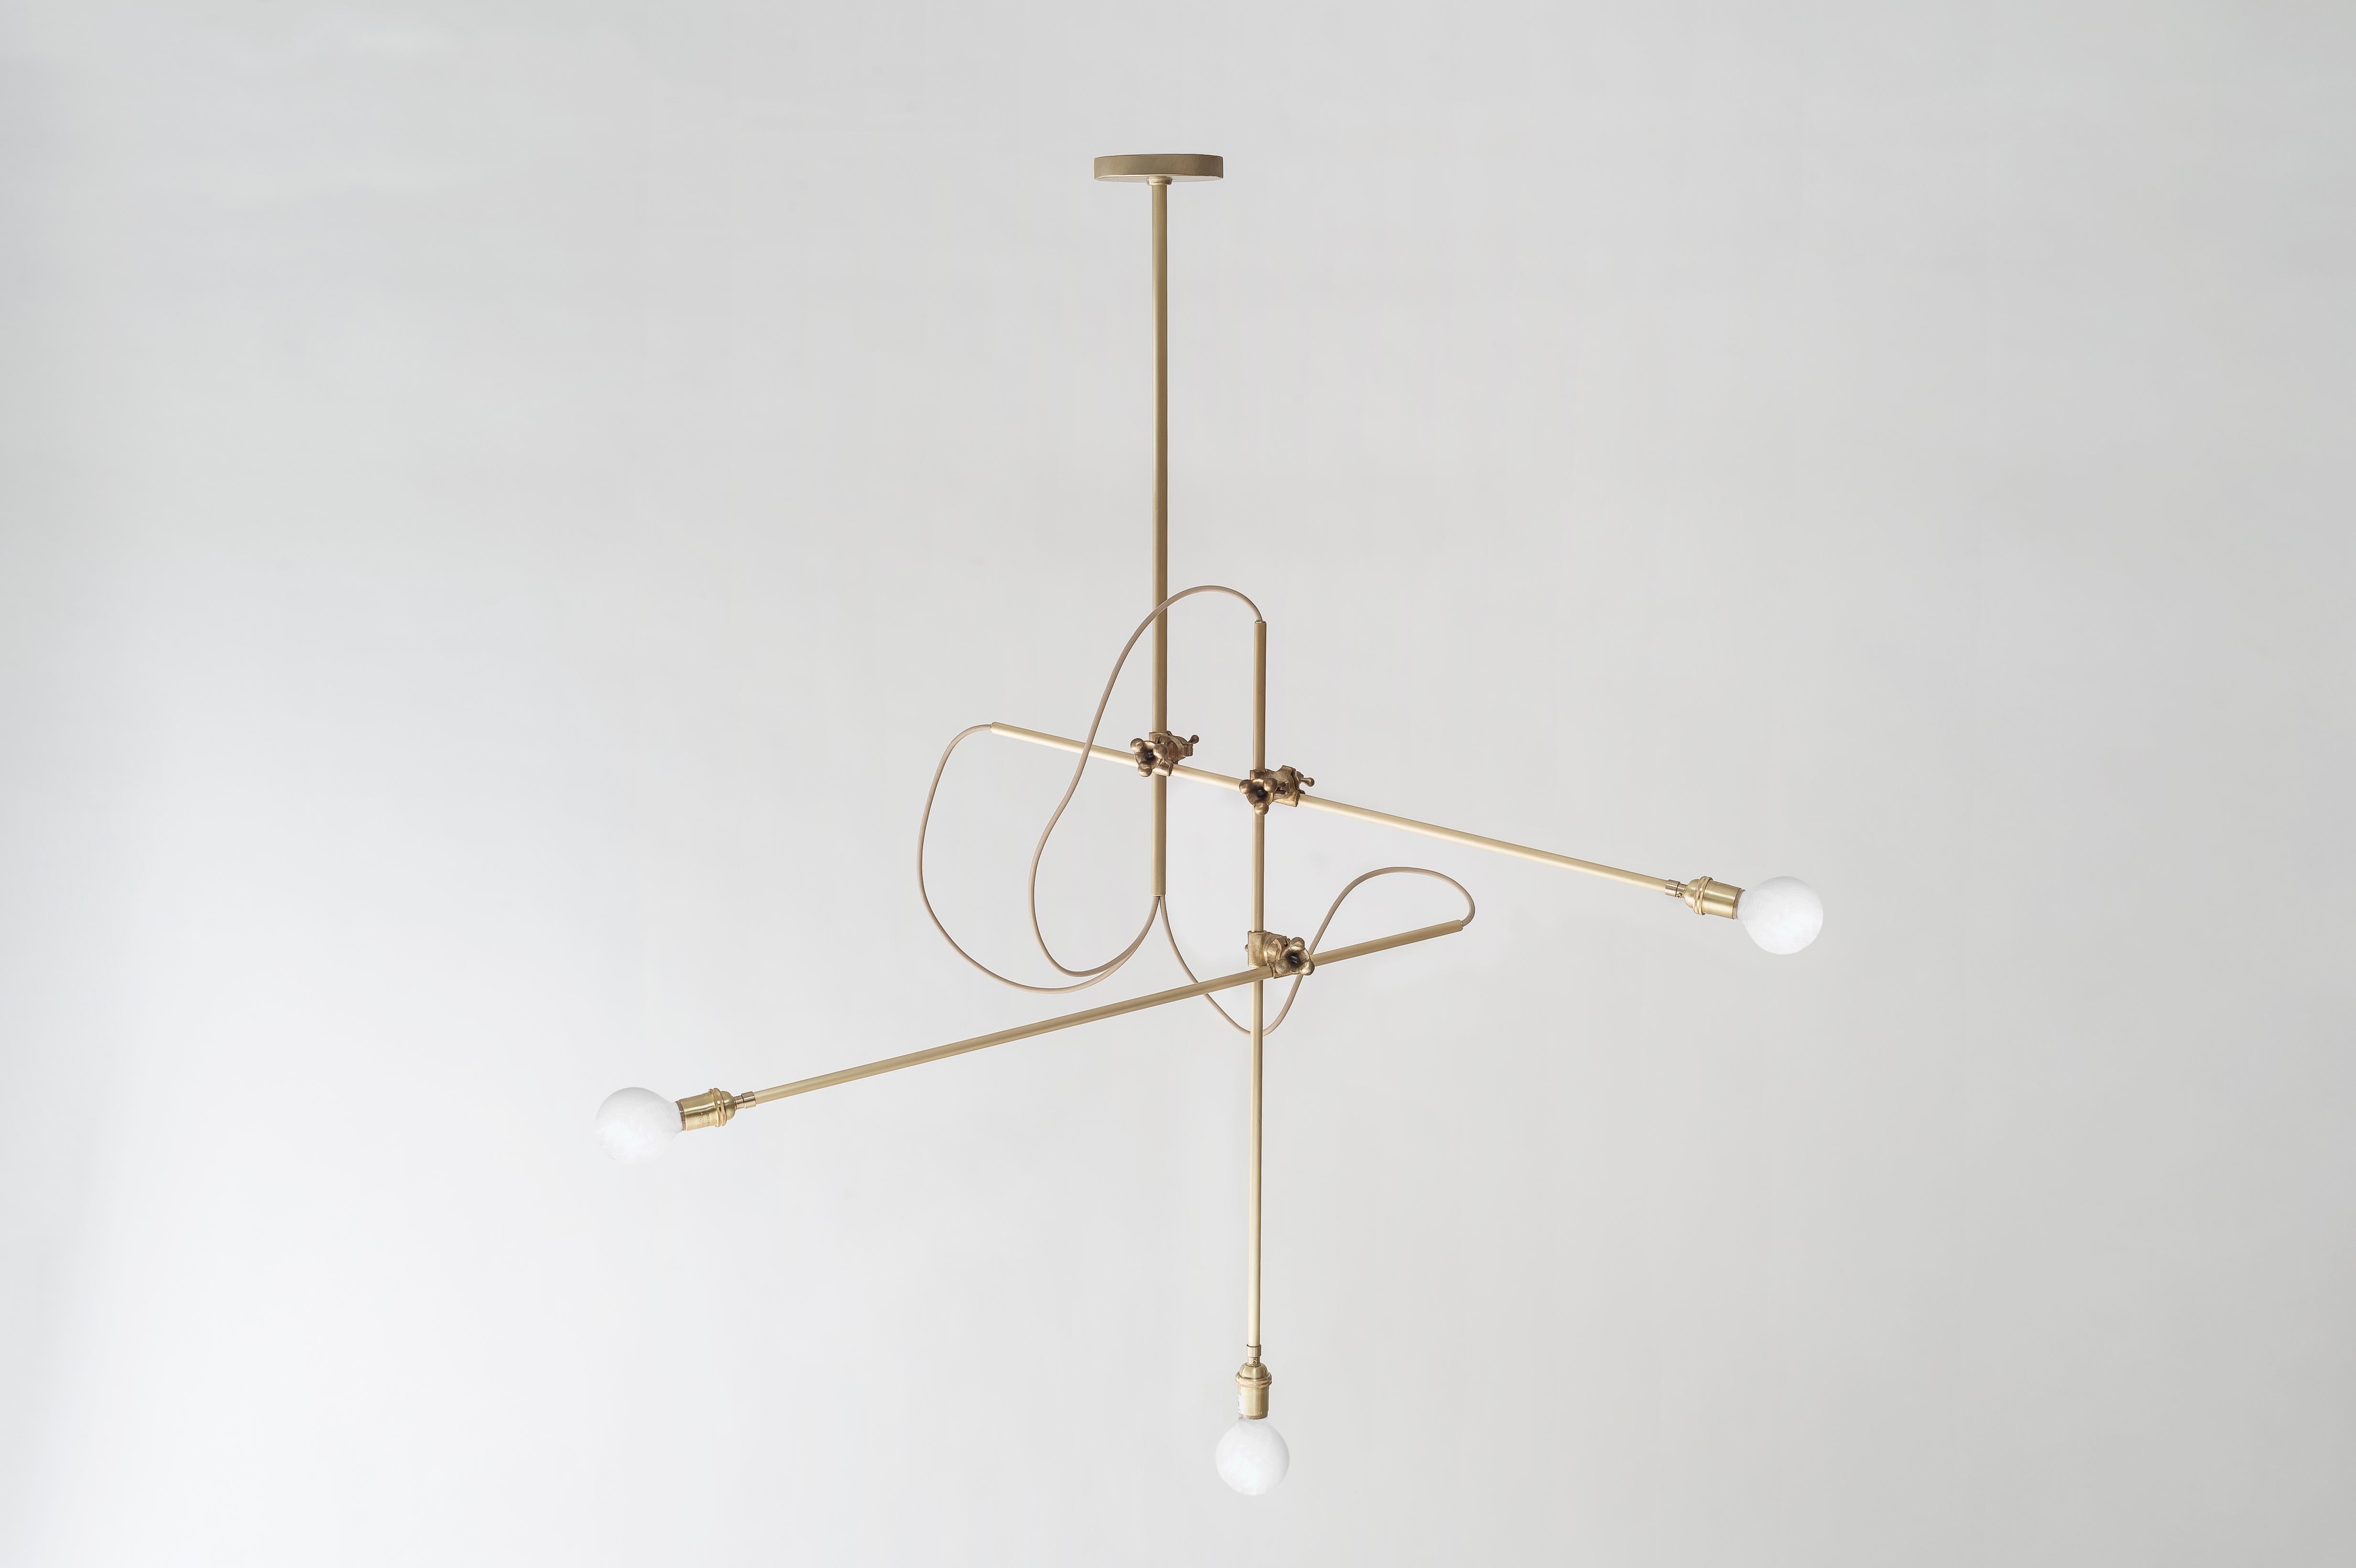 The Workstead chandelier fuses the concept of the chandelier with a keen understanding of function and flexibility. The same standard pieces can be reconfigured in countless ways; as a horizontal fixture that hangs only 30